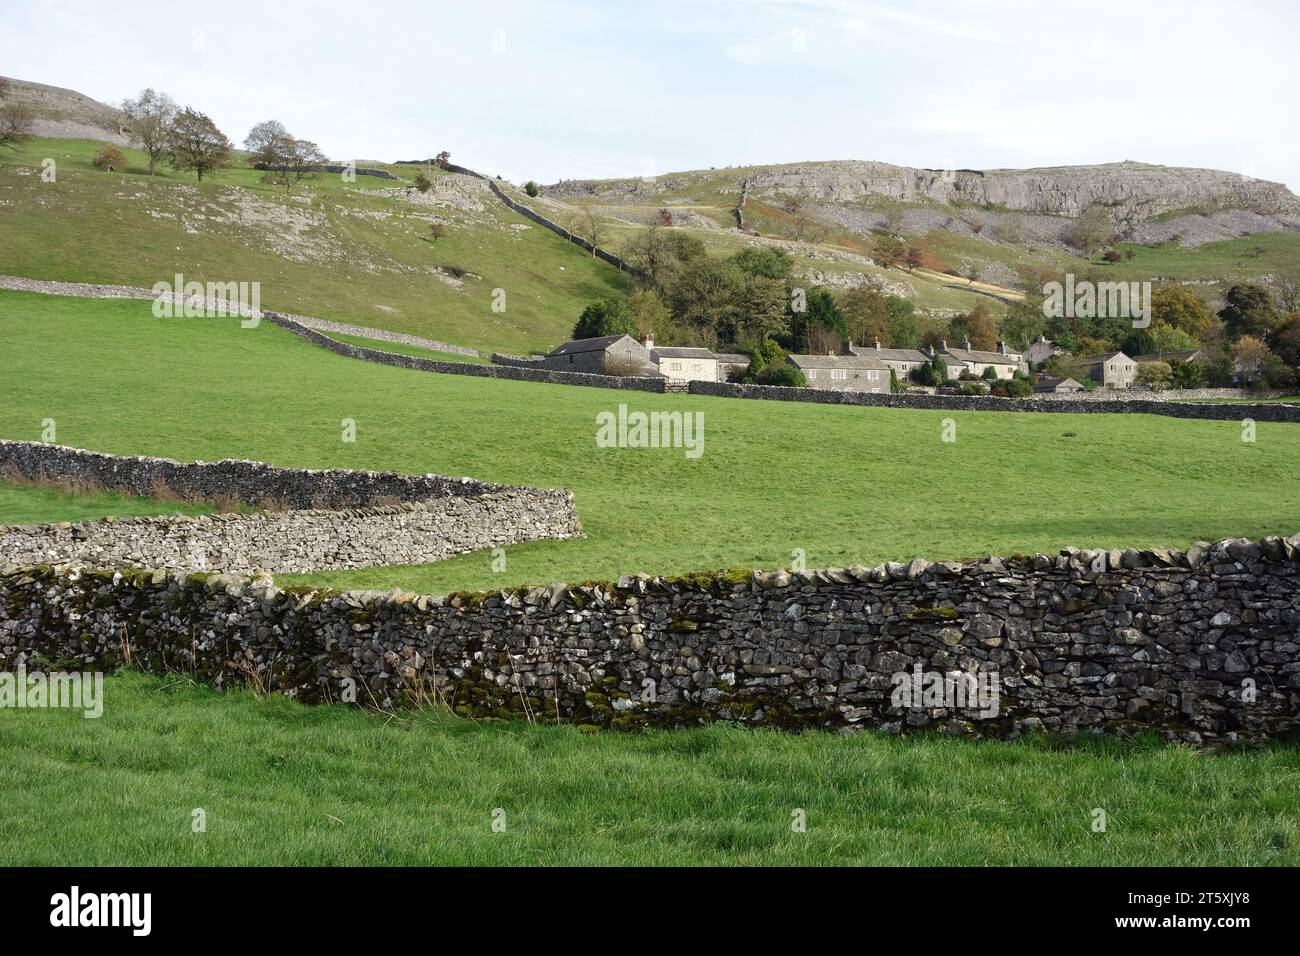 The Farming Hamlet of Feizor Below Pot Scar from the Pennine Bridleway to Austwick in the Yorkshire Dales National Park, England, UK. Stock Photo